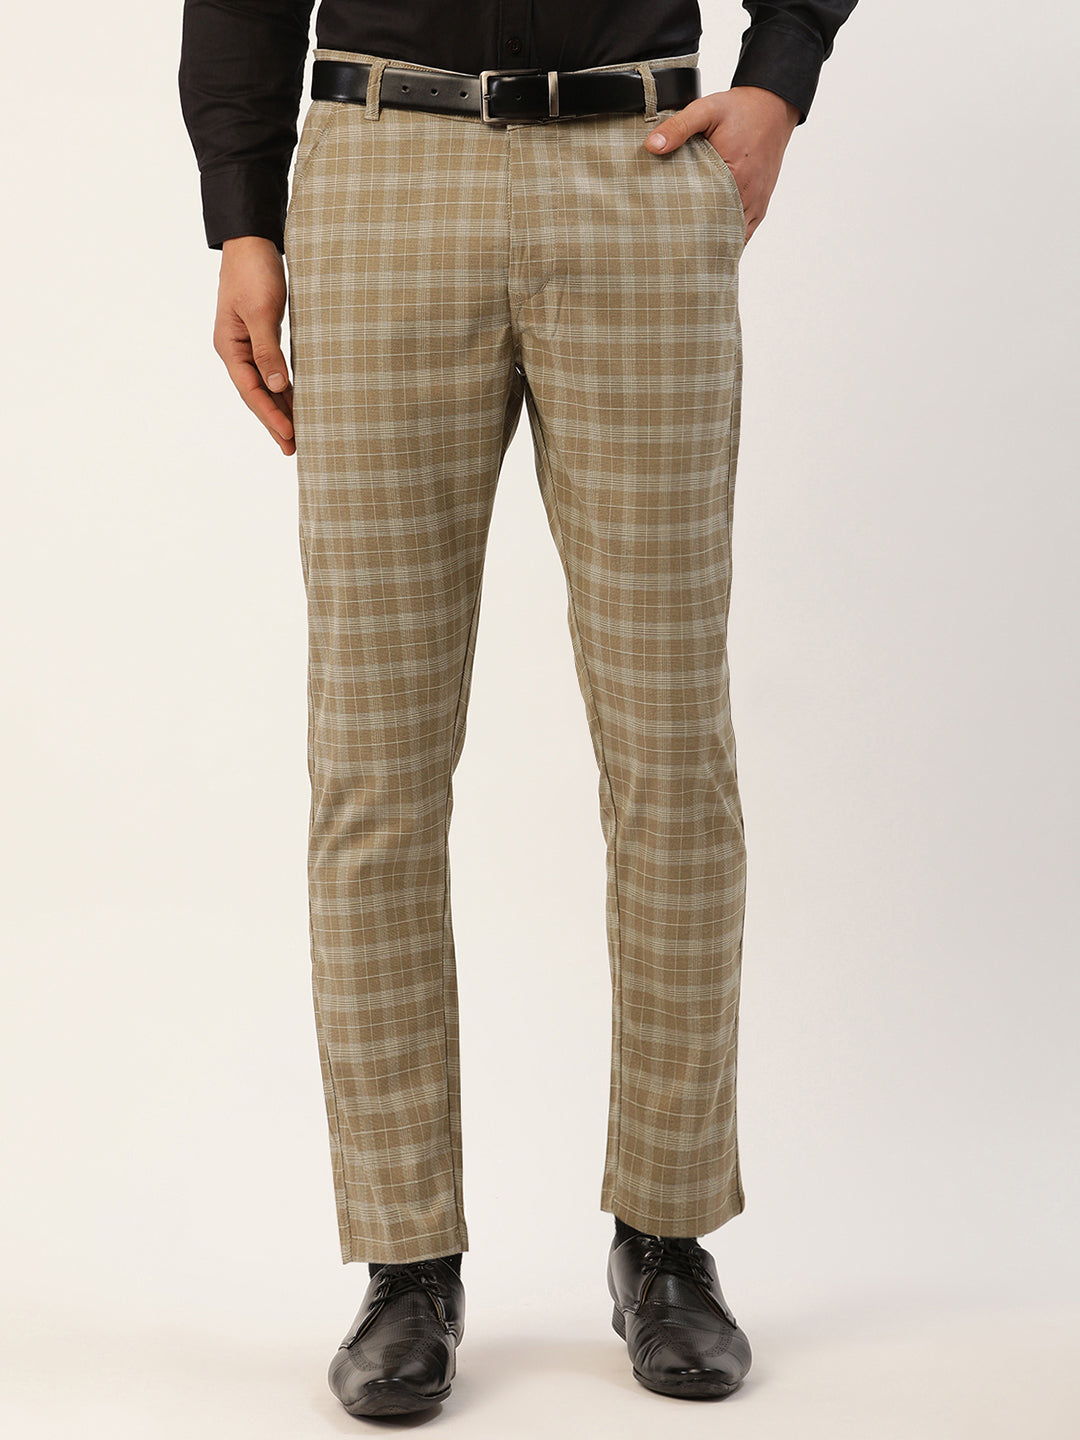 Slim Comfort B-95 Formal Charcoal Check Trouser - Cans